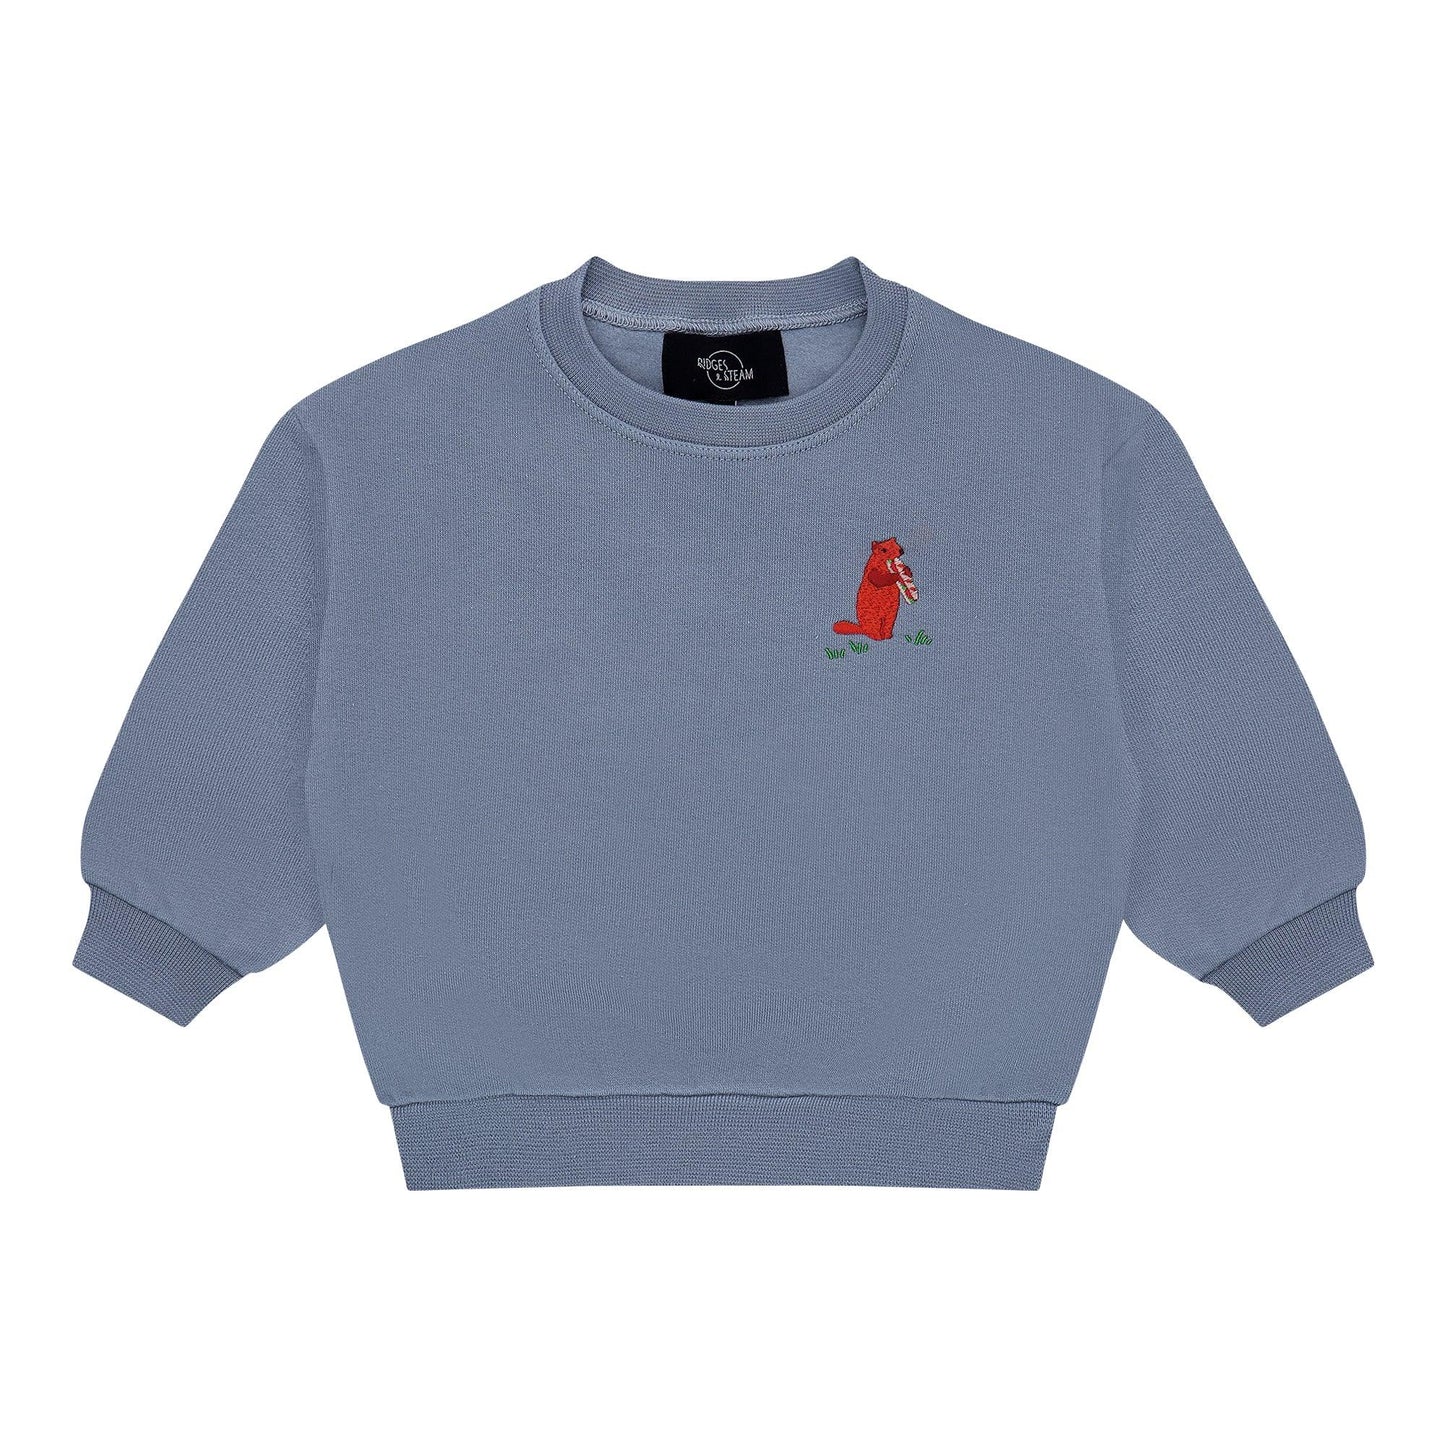 Baby/Kid 'Picnic time' sweater - woudchuck - blue - Ridges And Steam